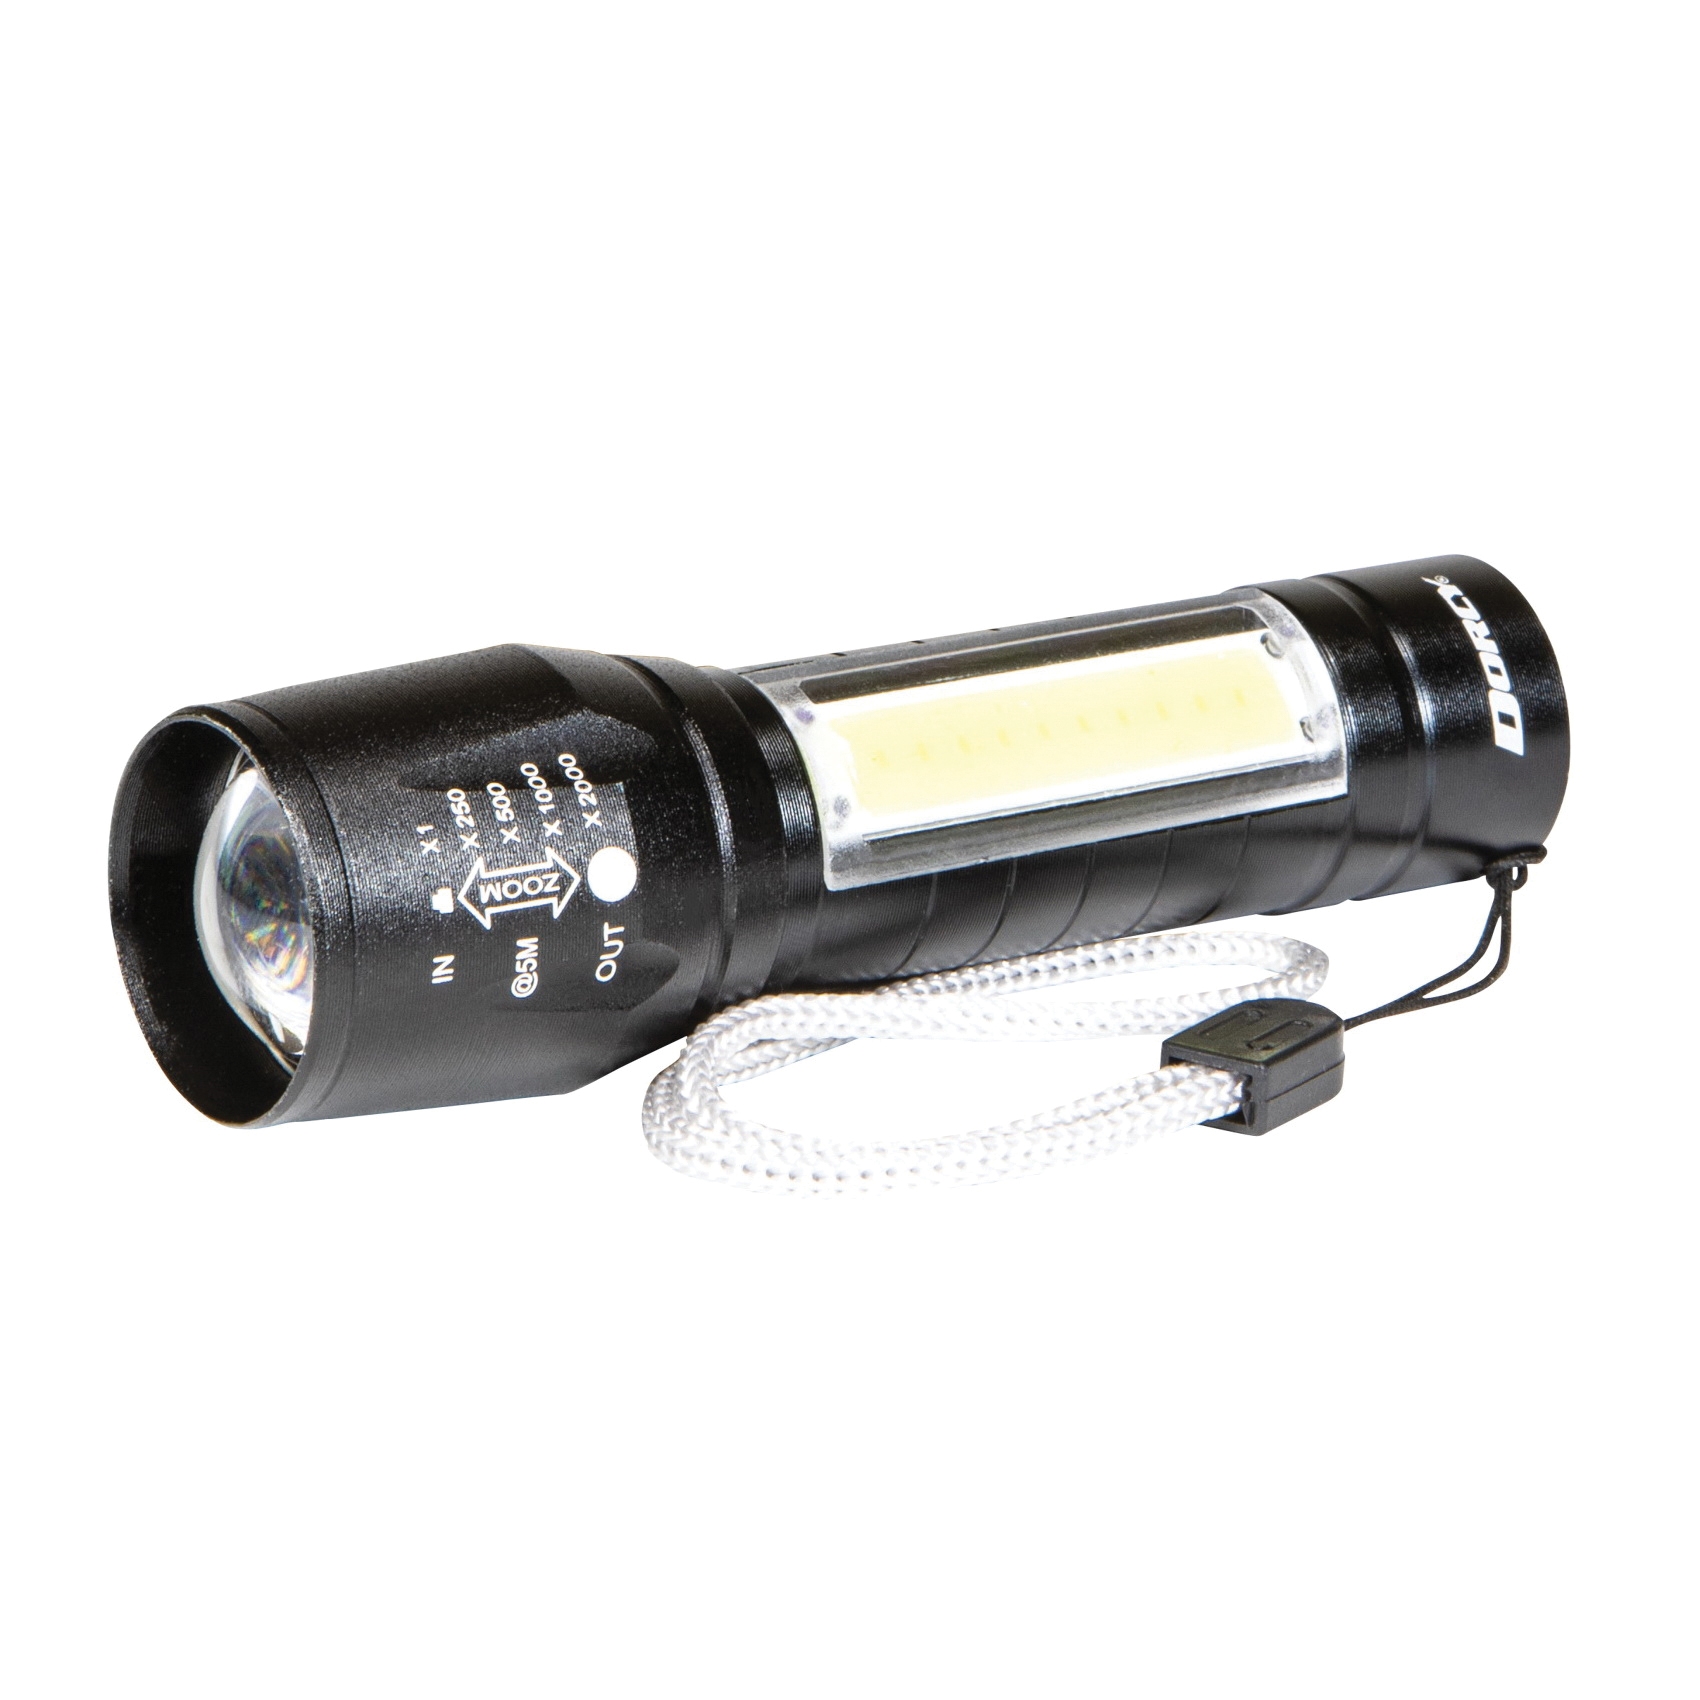 Ultra HD Series 41-4380 Flashlight and Area Light, Lithium-Ion, Rechargeable Battery, 100 Lumens Lumens, Black